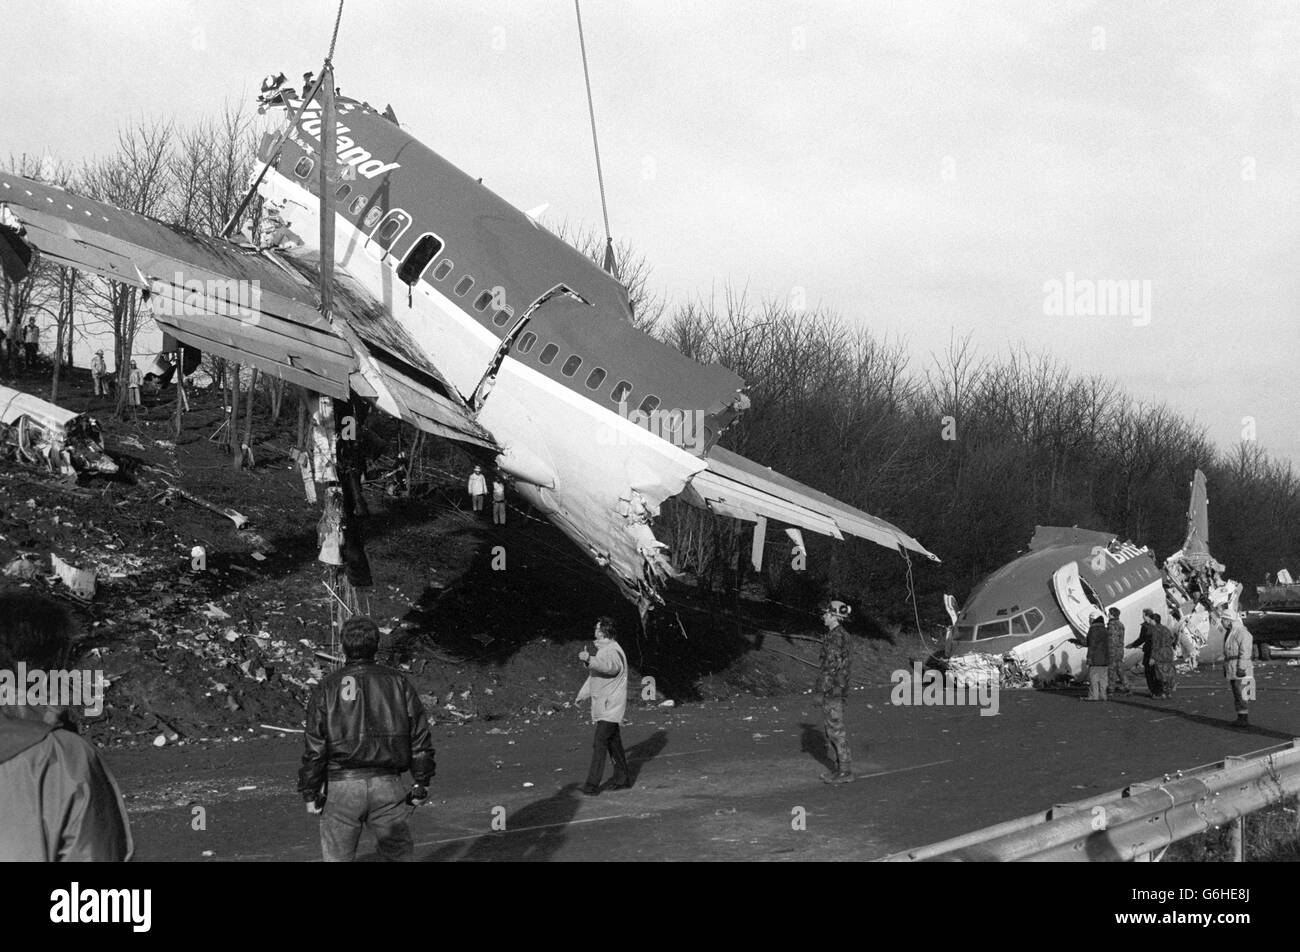 The British Midland 737's crumpled fuselage and wings are lifted from the M1 embankment near Kegworth, Leicestershire, under the supervision of experts from the Department of Transport's Air Accident Investigation Branch. Stock Photo